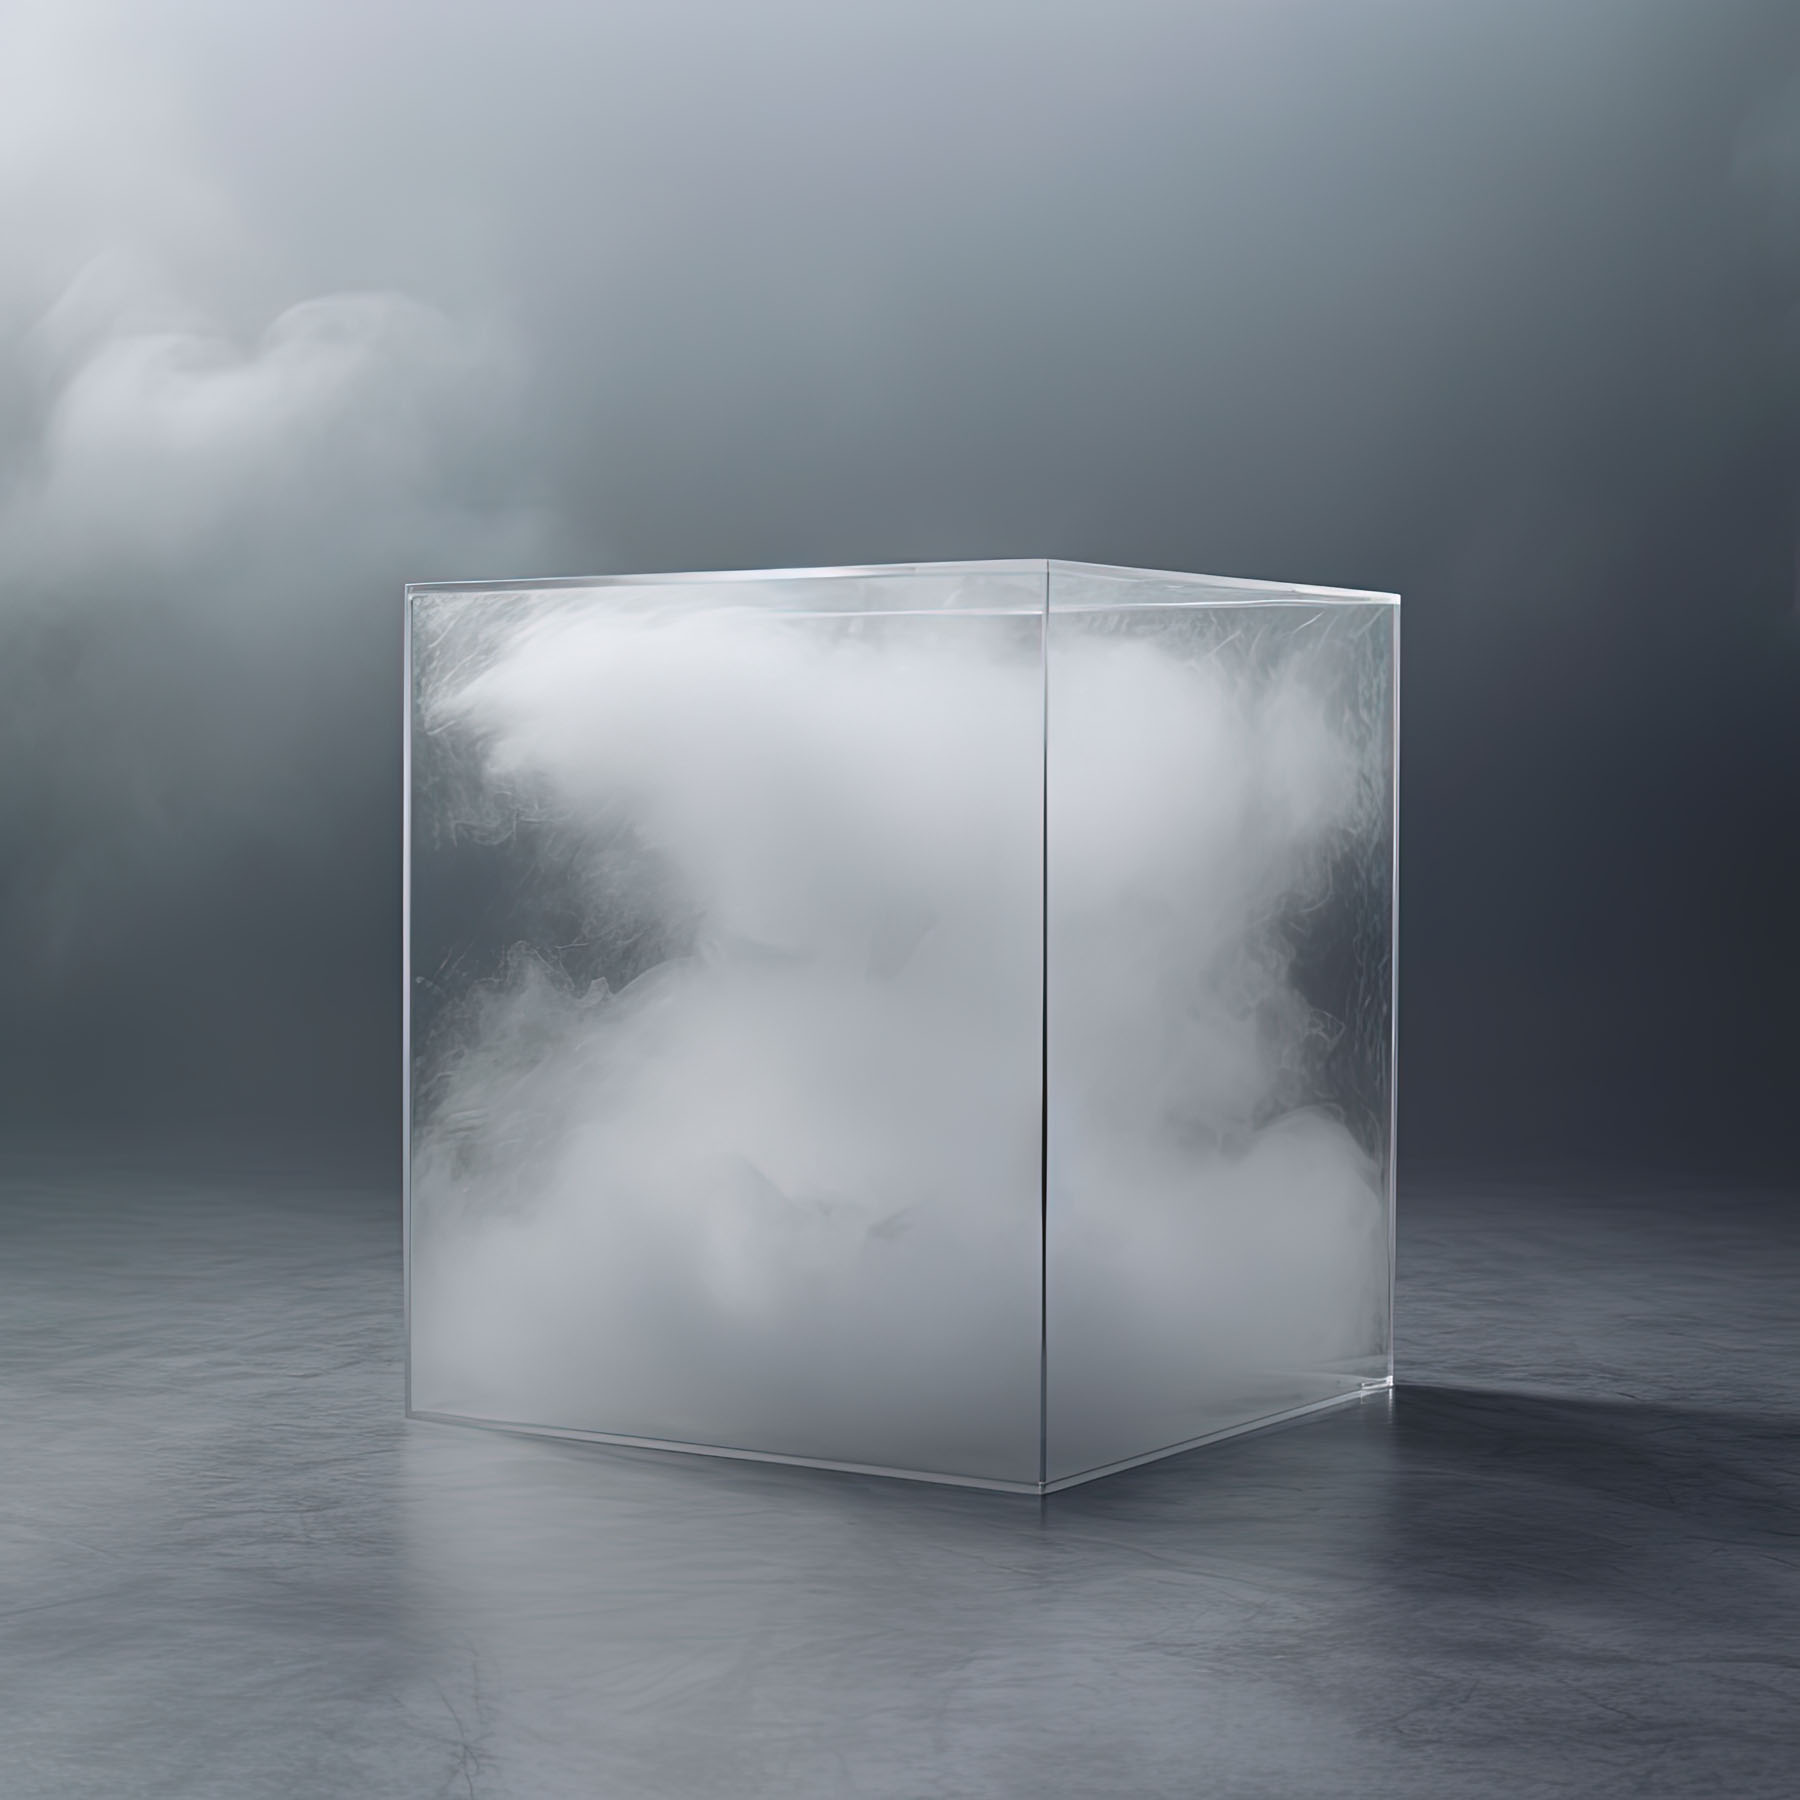 A transparent cube holding swirling smoke in it's interior sits surrounded by fog on a metallic floor.